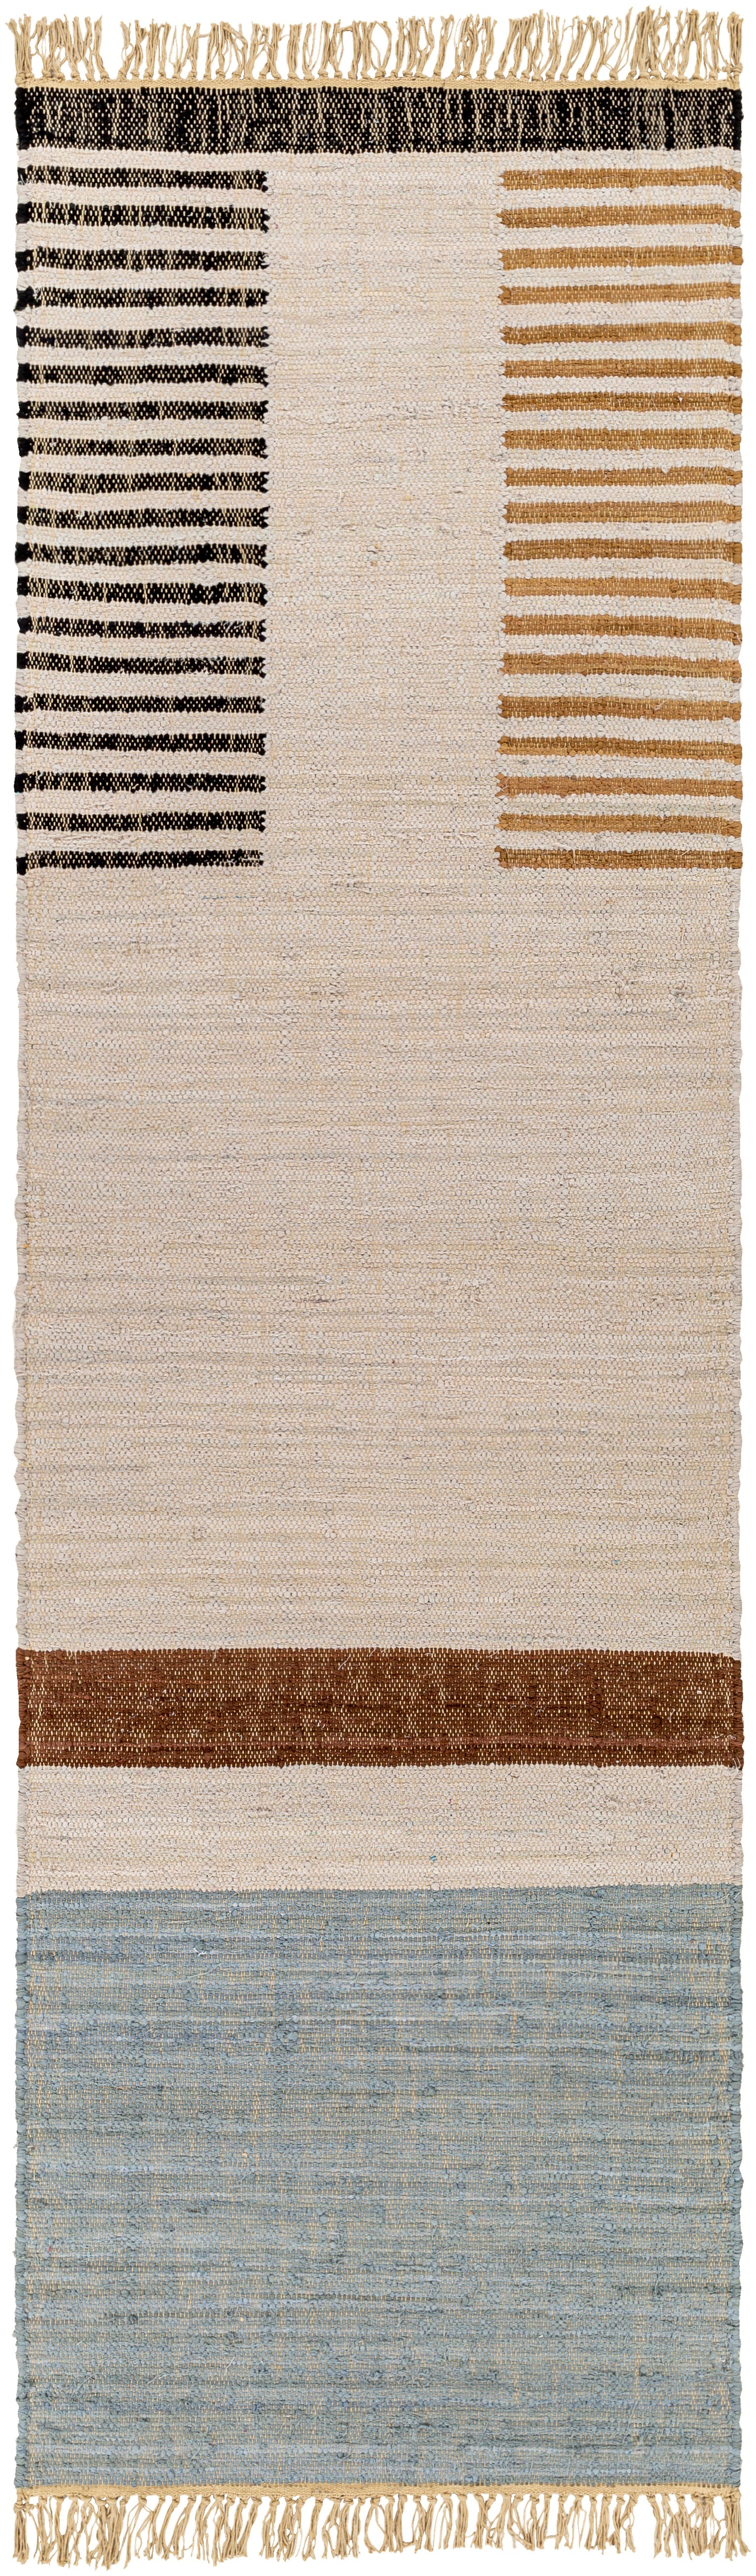 Fulham 26509 Hand Woven Cotton Indoor Area Rug by Surya Rugs